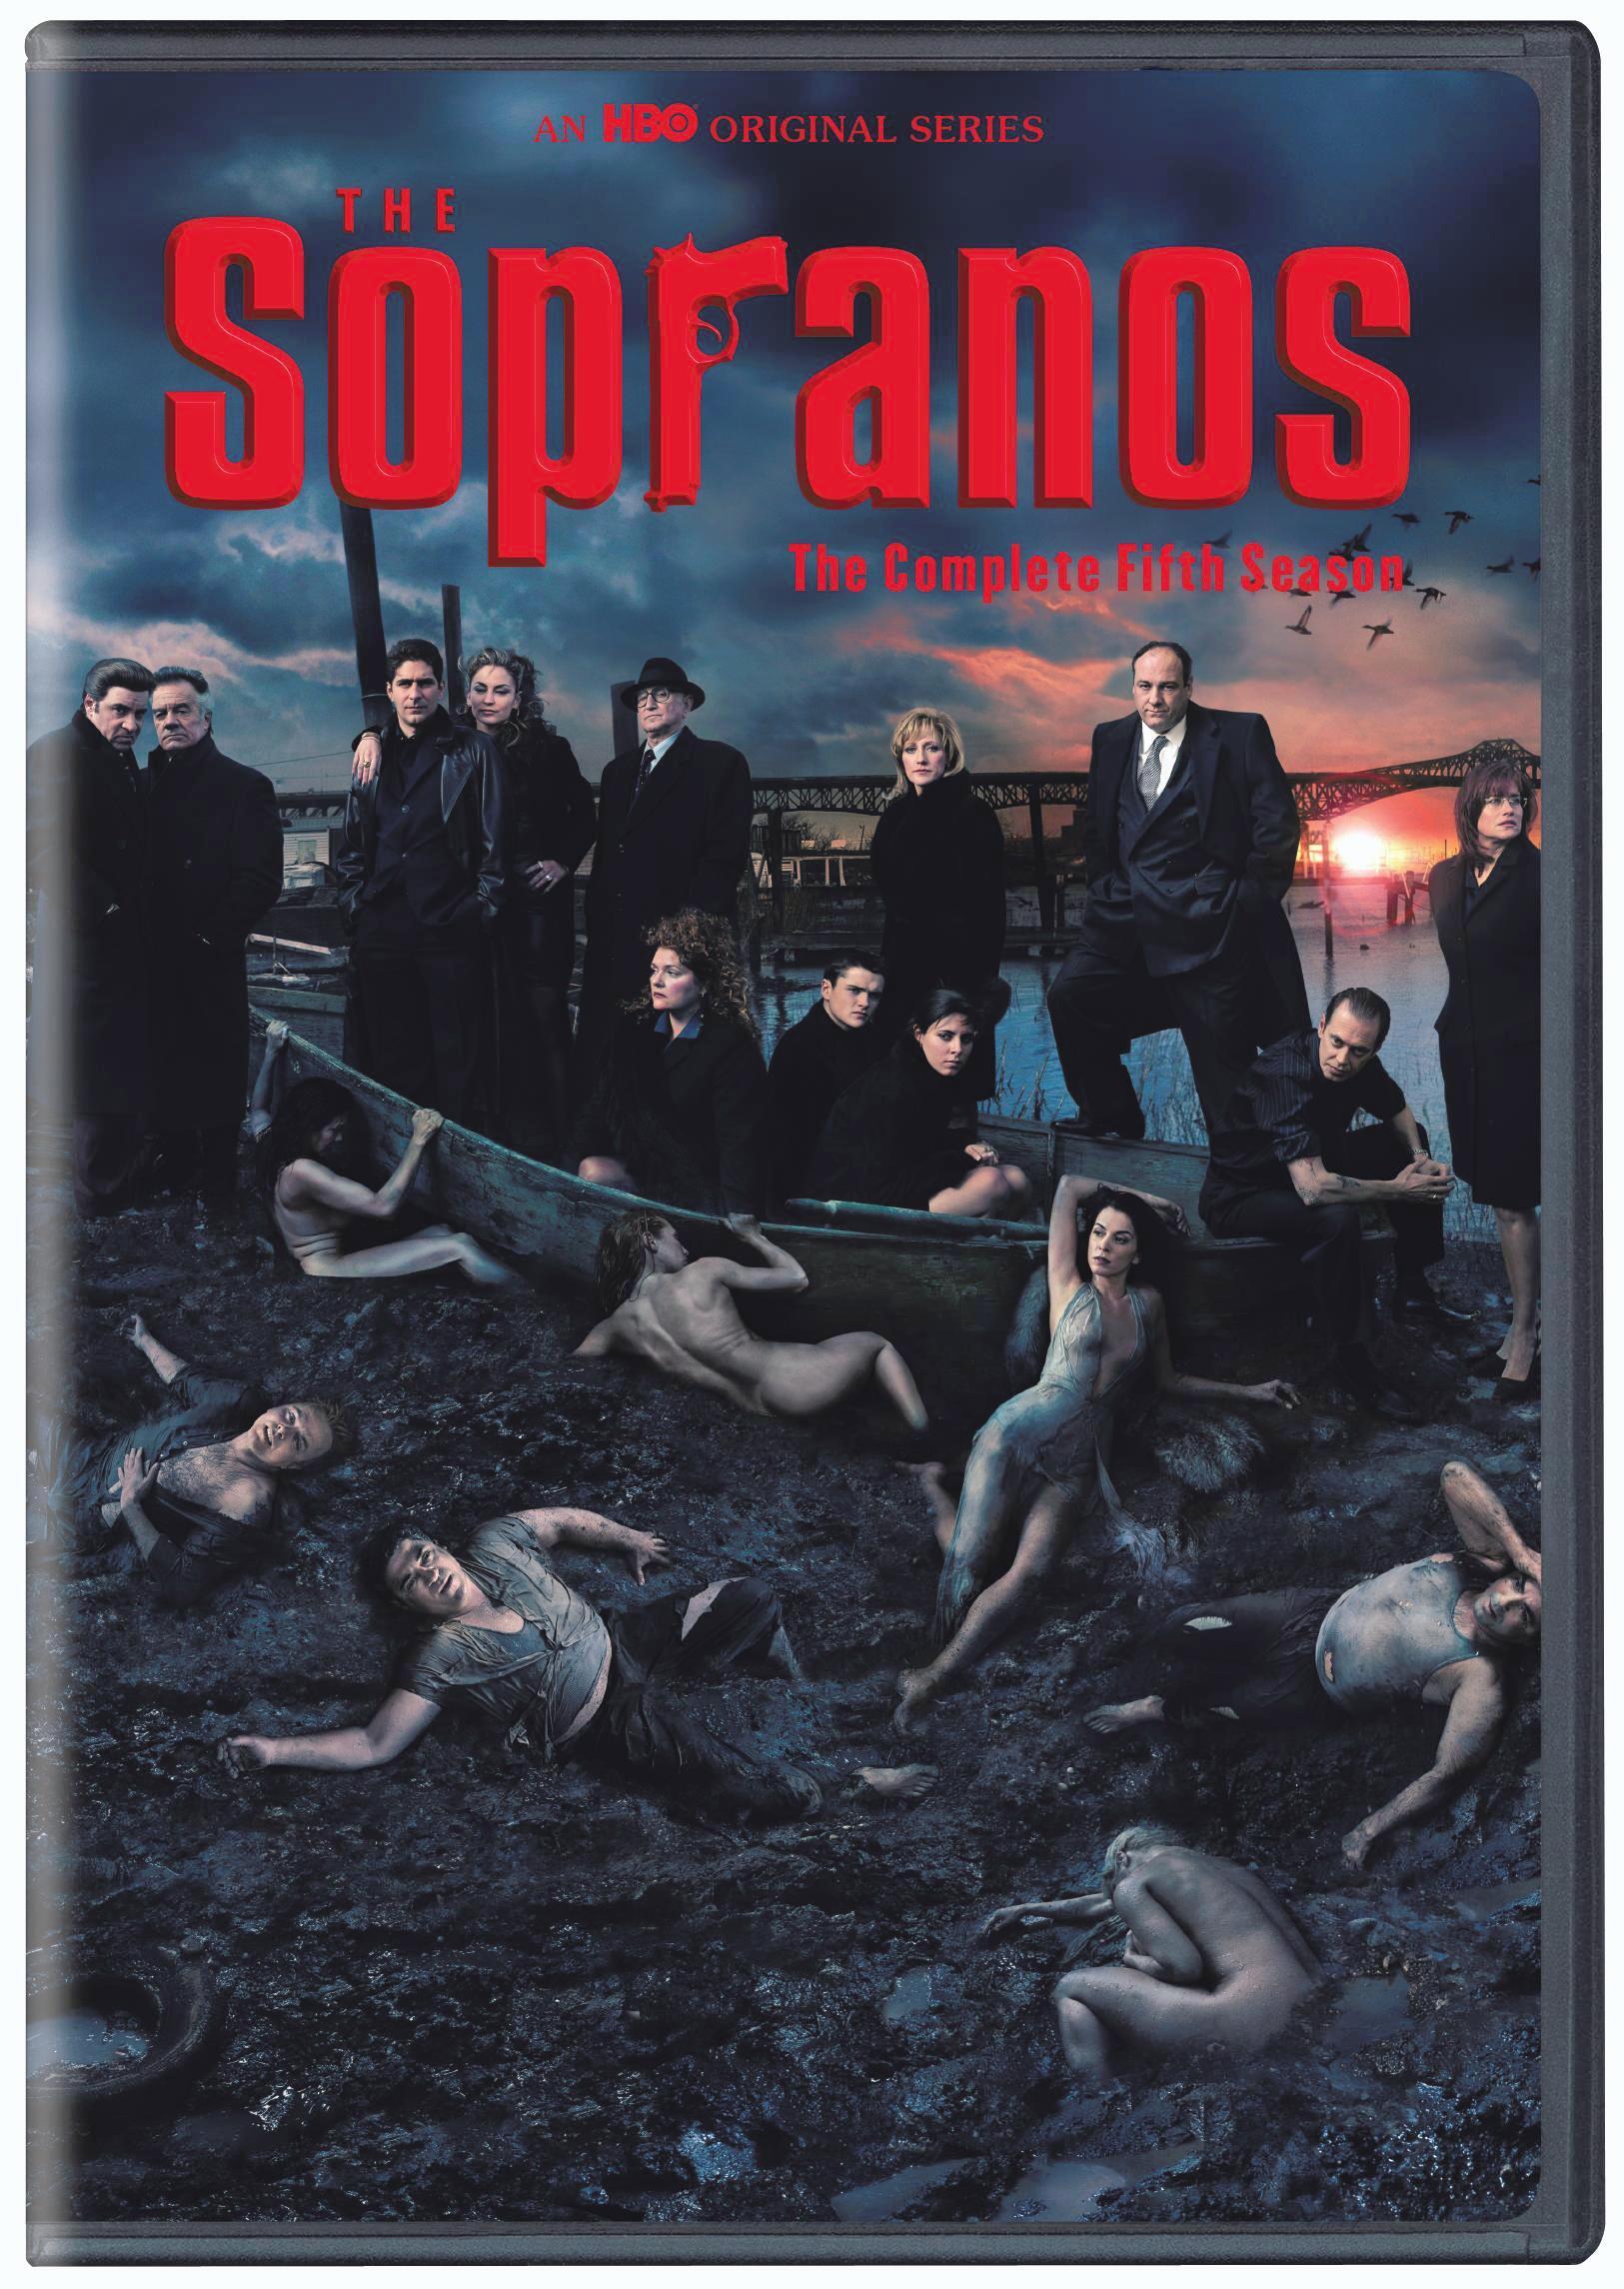 The Sopranos: Complete Series 5 (Box Set) - DVD [ 2004 ]  - Drama Television On DVD - TV Shows On GRUV